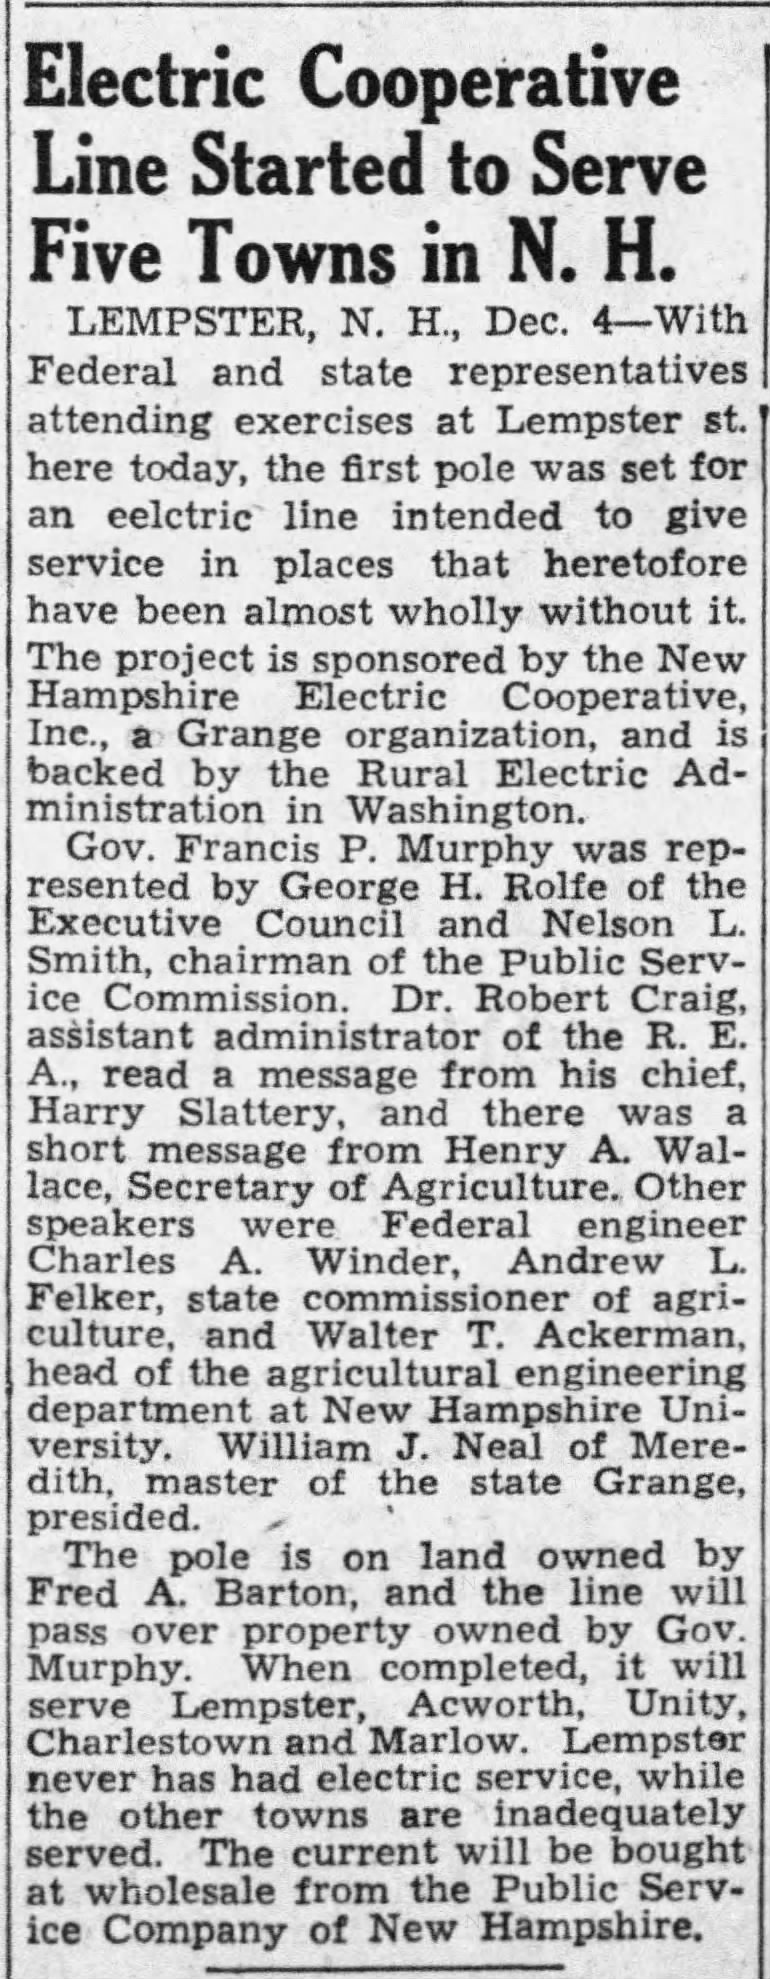 Electric Cooperative Line Started to Serve Five Towns in N. H.